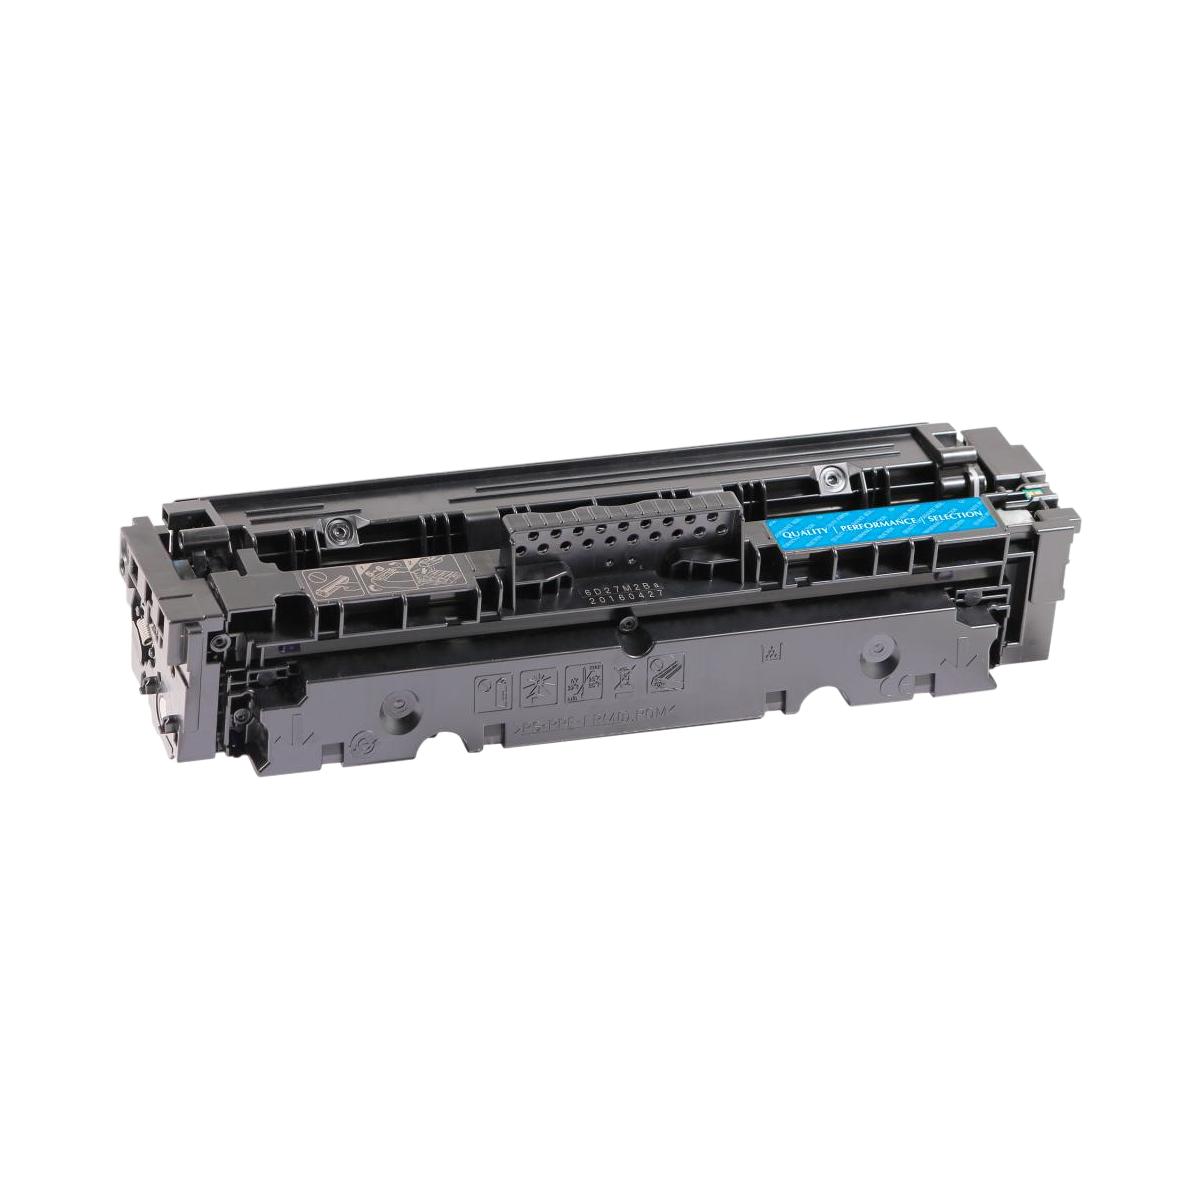 Canon 046 (1249C001) Cyan Remanufactured Toner Cartridge [2,300 Pages]